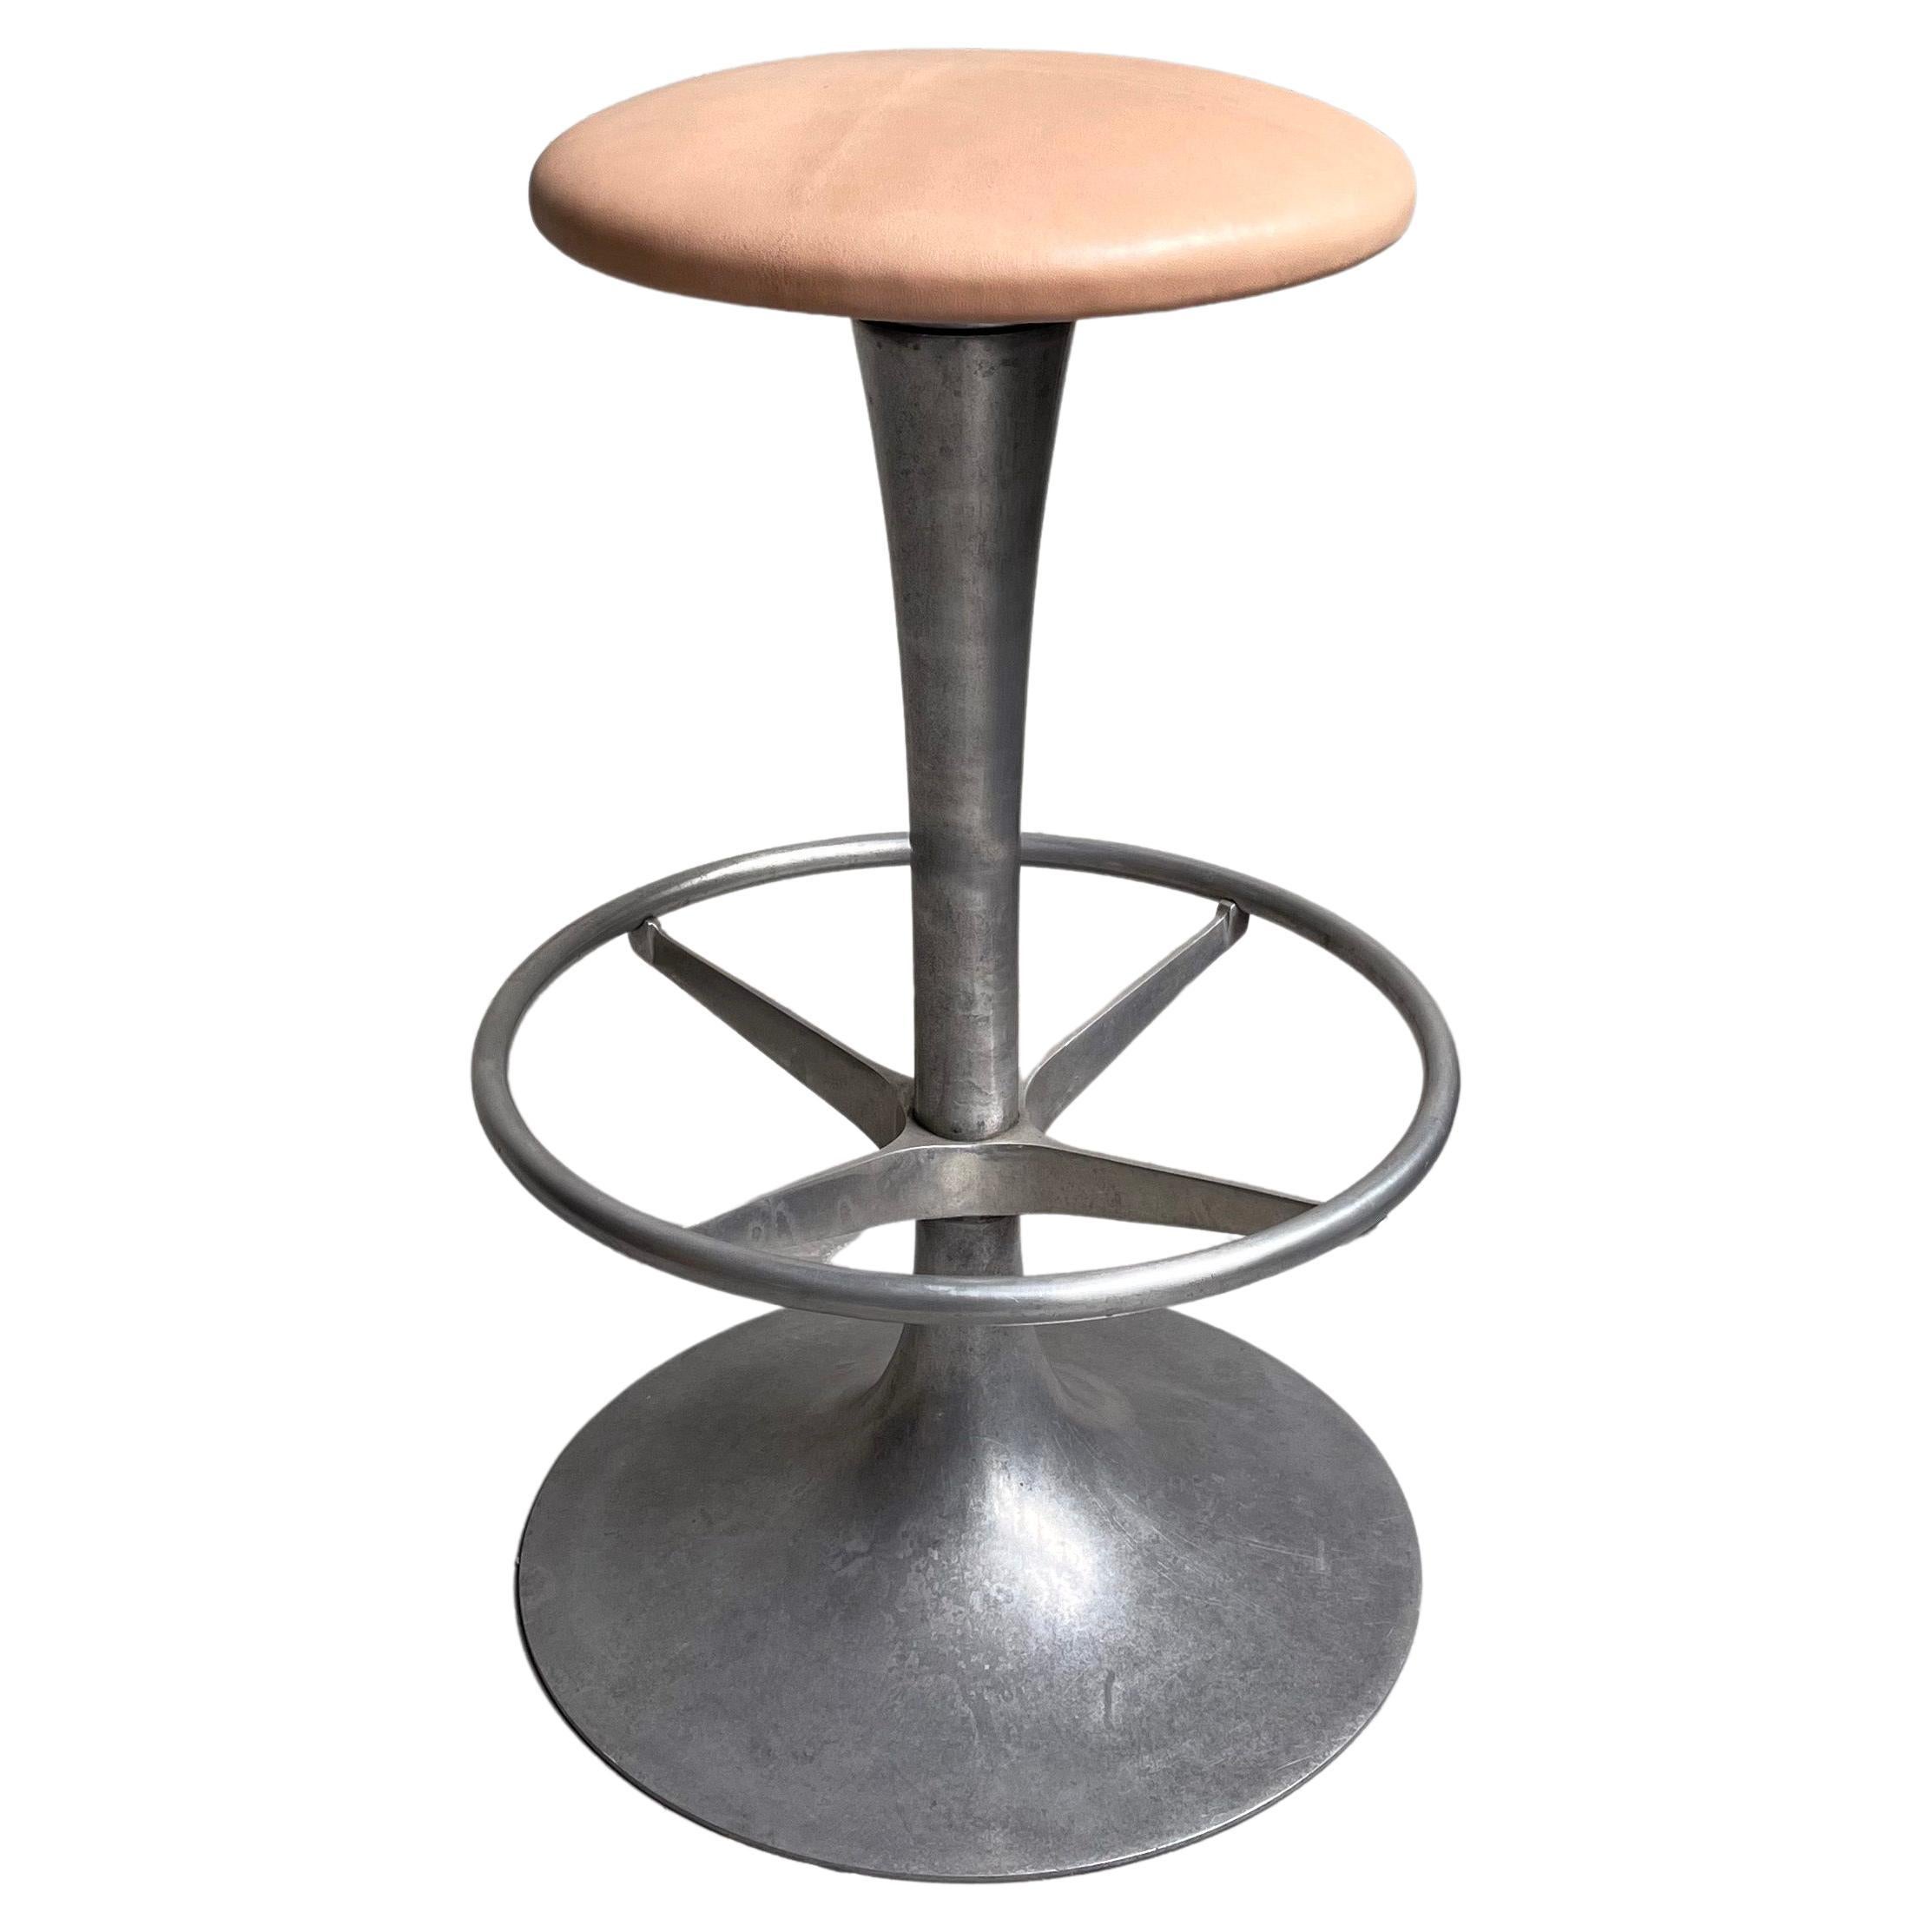 Tall Industrial Brushed Aluminum and Leather Pedestal Stool